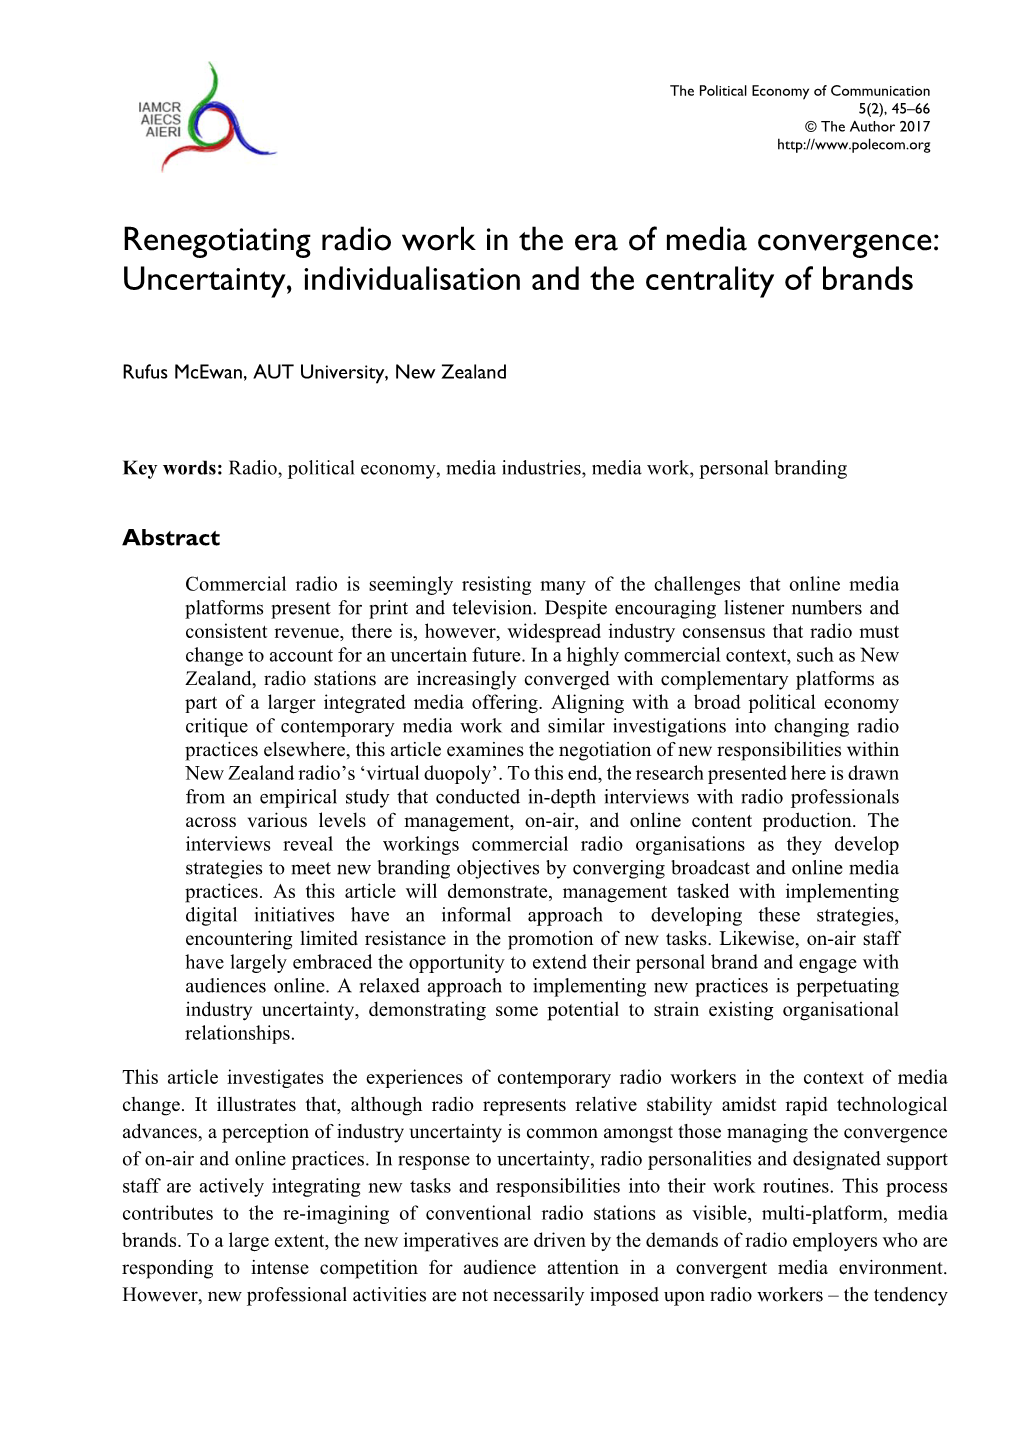 Renegotiating Radio Work in the Era of Media Convergence: Uncertainty, Individualisation and the Centrality of Brands